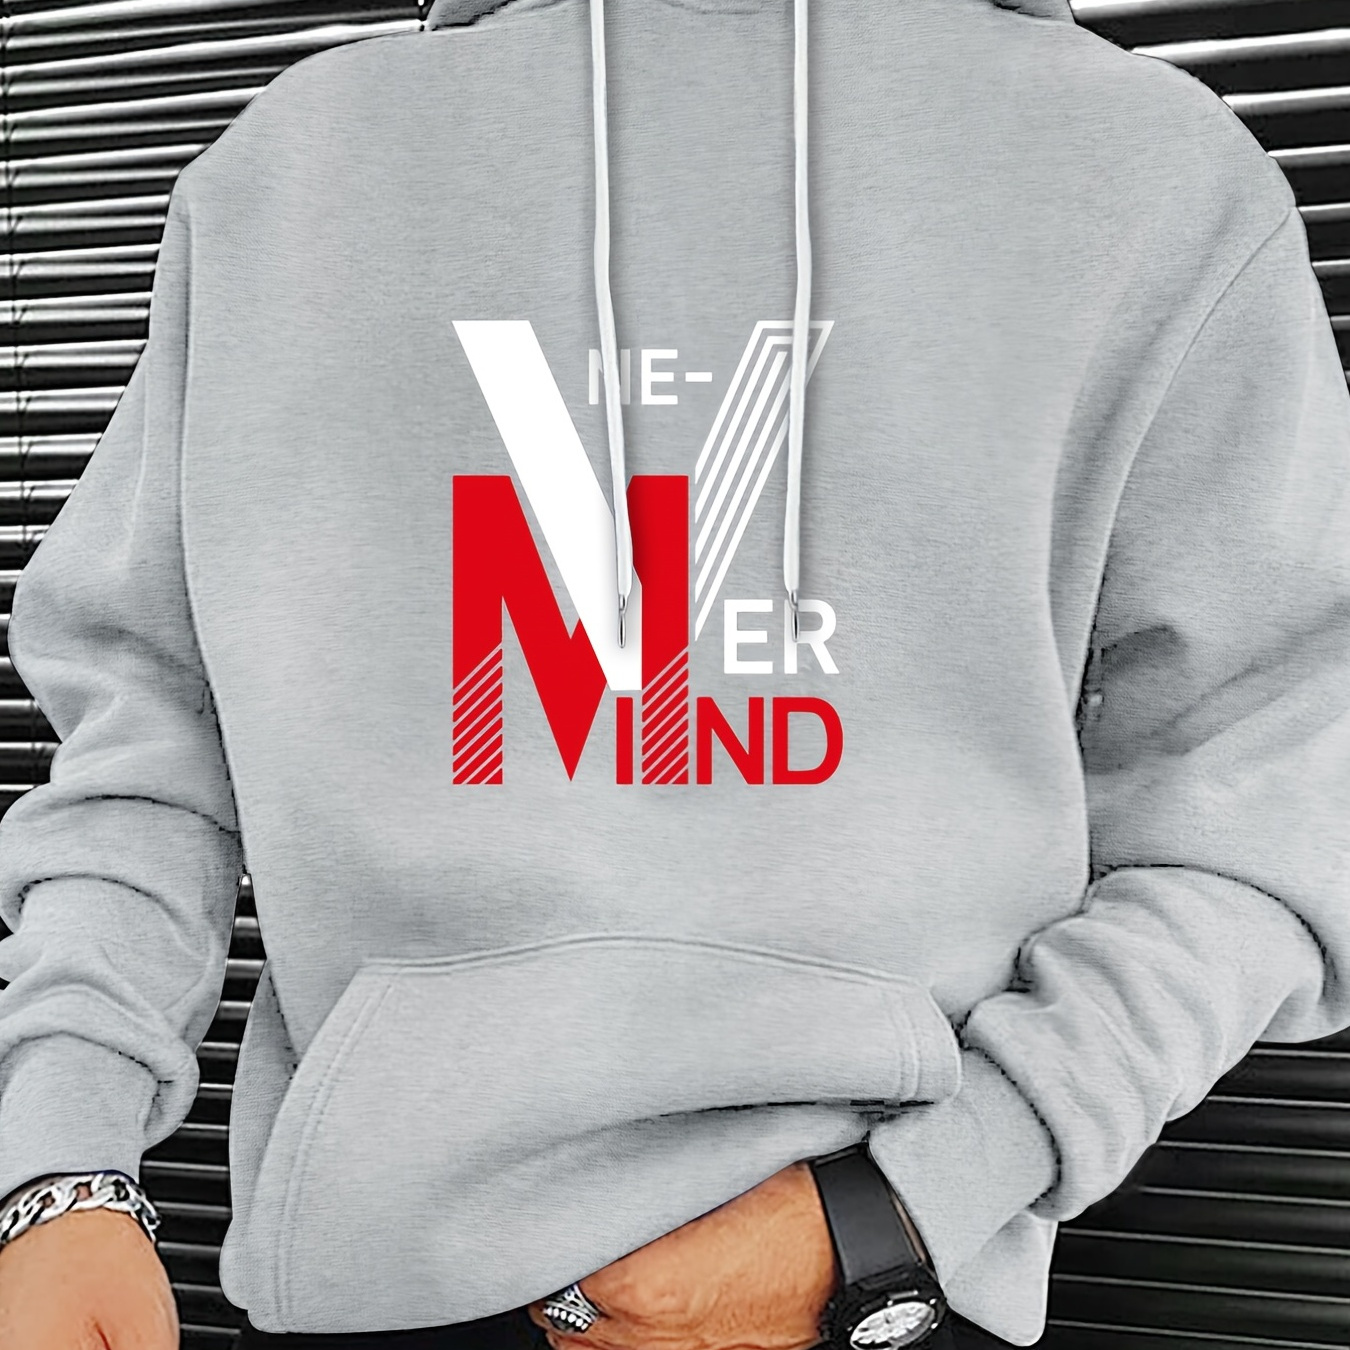 

Nevermind Print Hoodie, Cool Hoodies For Men, Men's Casual Graphic Design Pullover Hooded Sweatshirt With Kangaroo Pocket Streetwear For Winter Fall, As Gifts